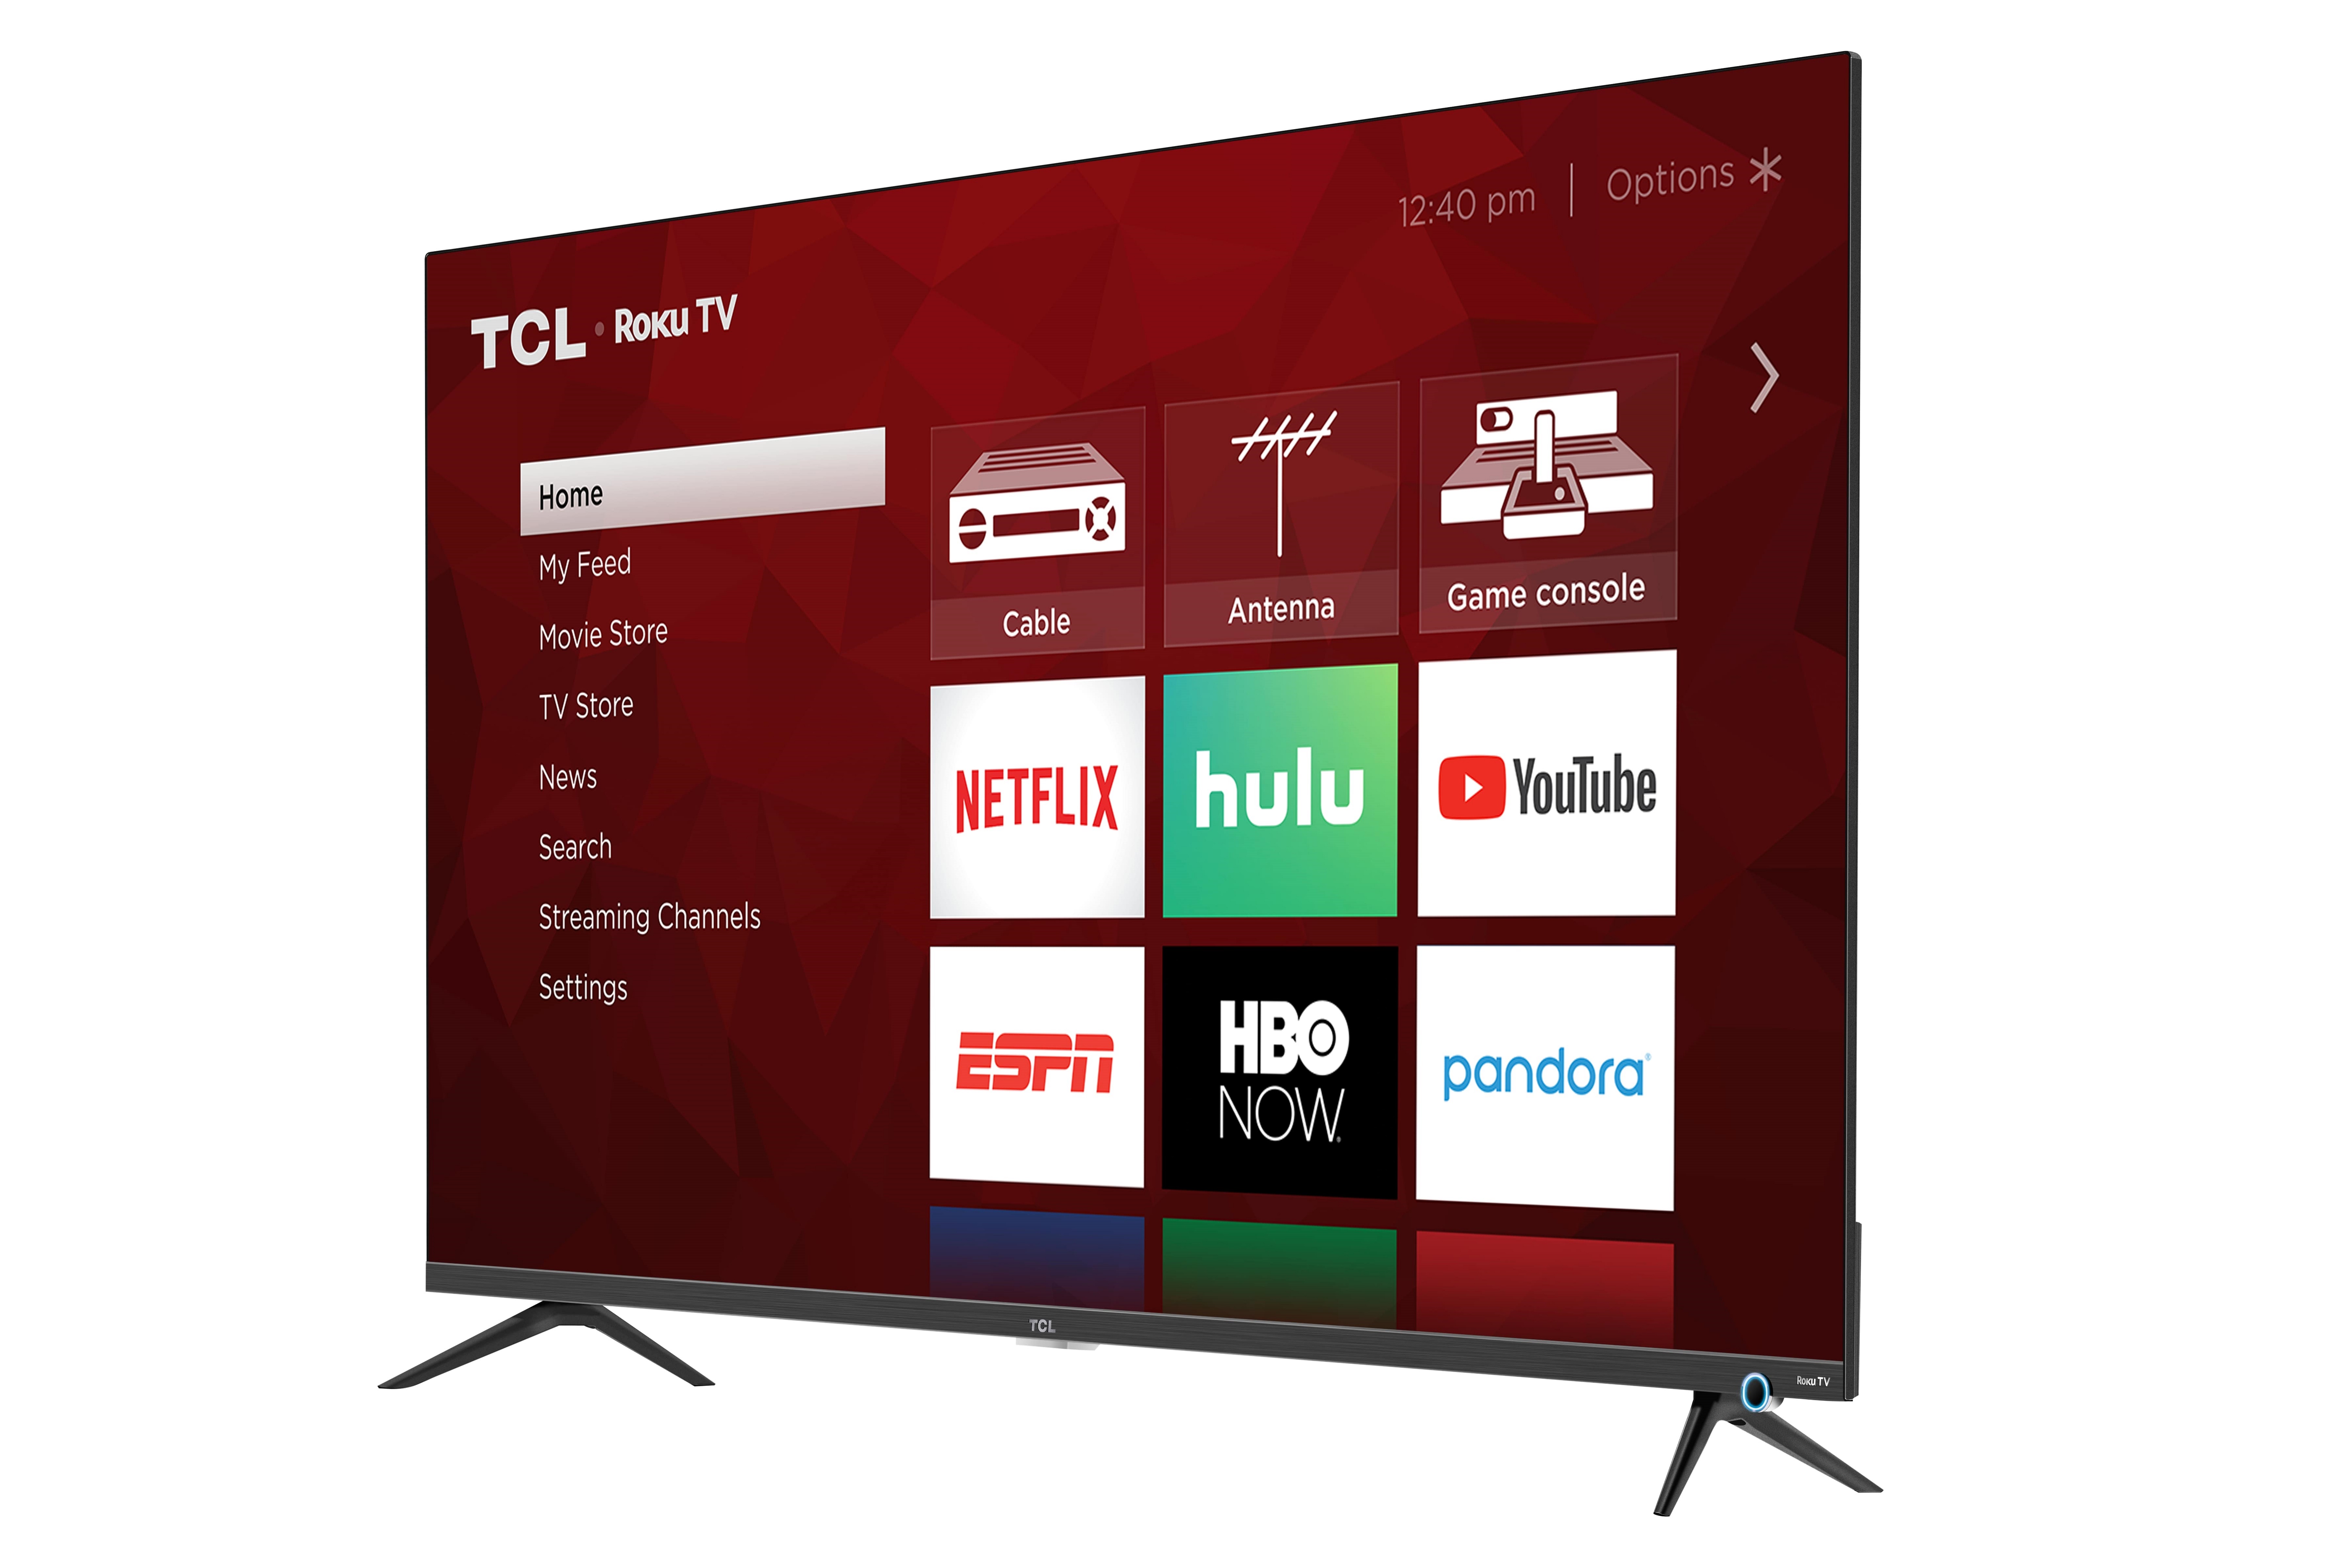 TCL 65 Class 5-Series 4K UHD Dolby Vision HDR LED Roku Smart TV - 65S525 - image 3 of 12